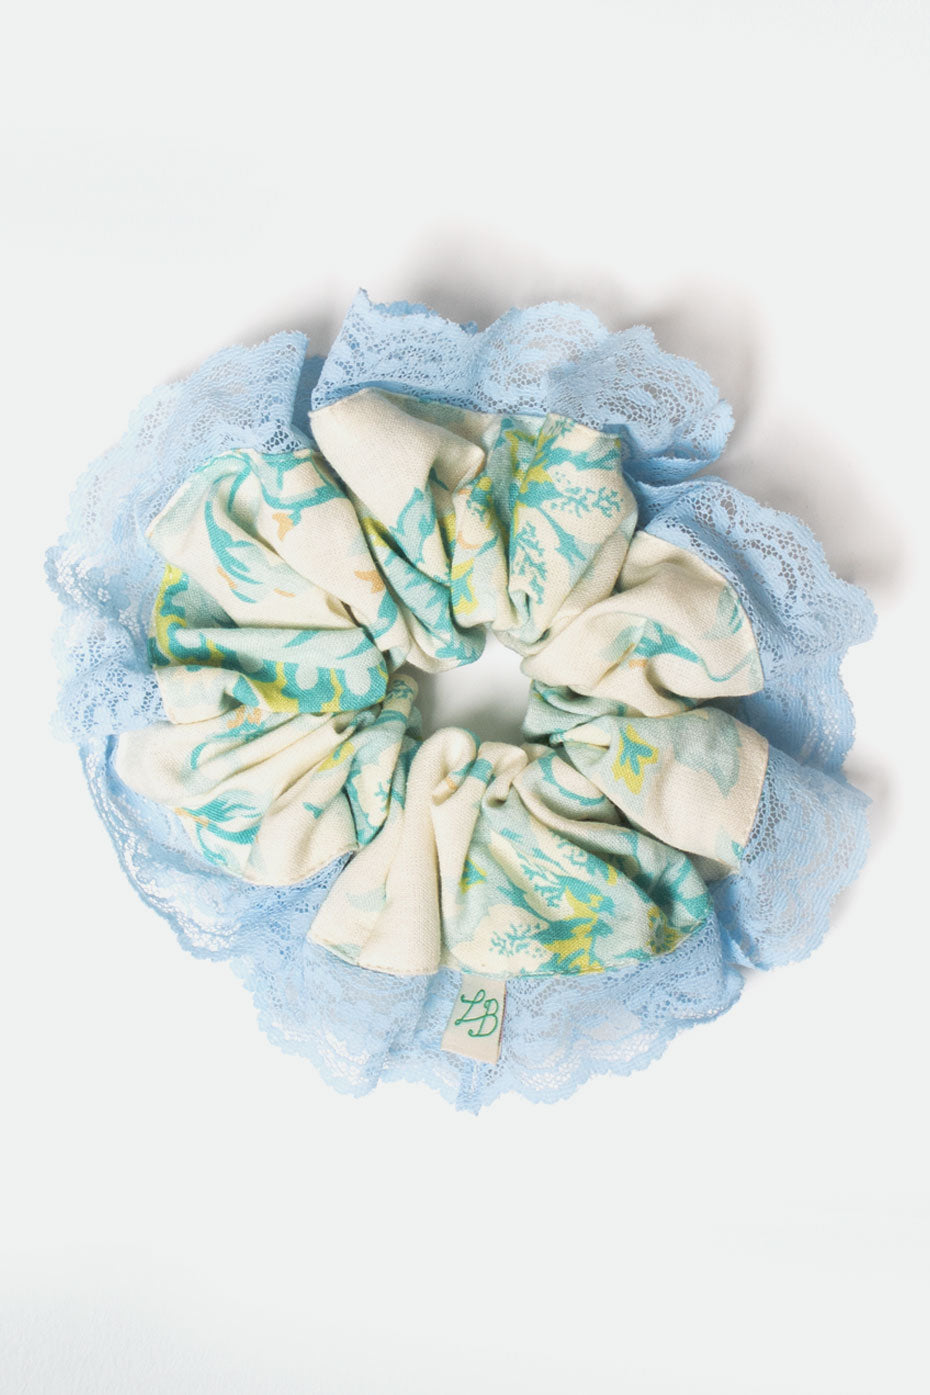 lydia-bolton-white-and-blue-double-twist-scrunchie